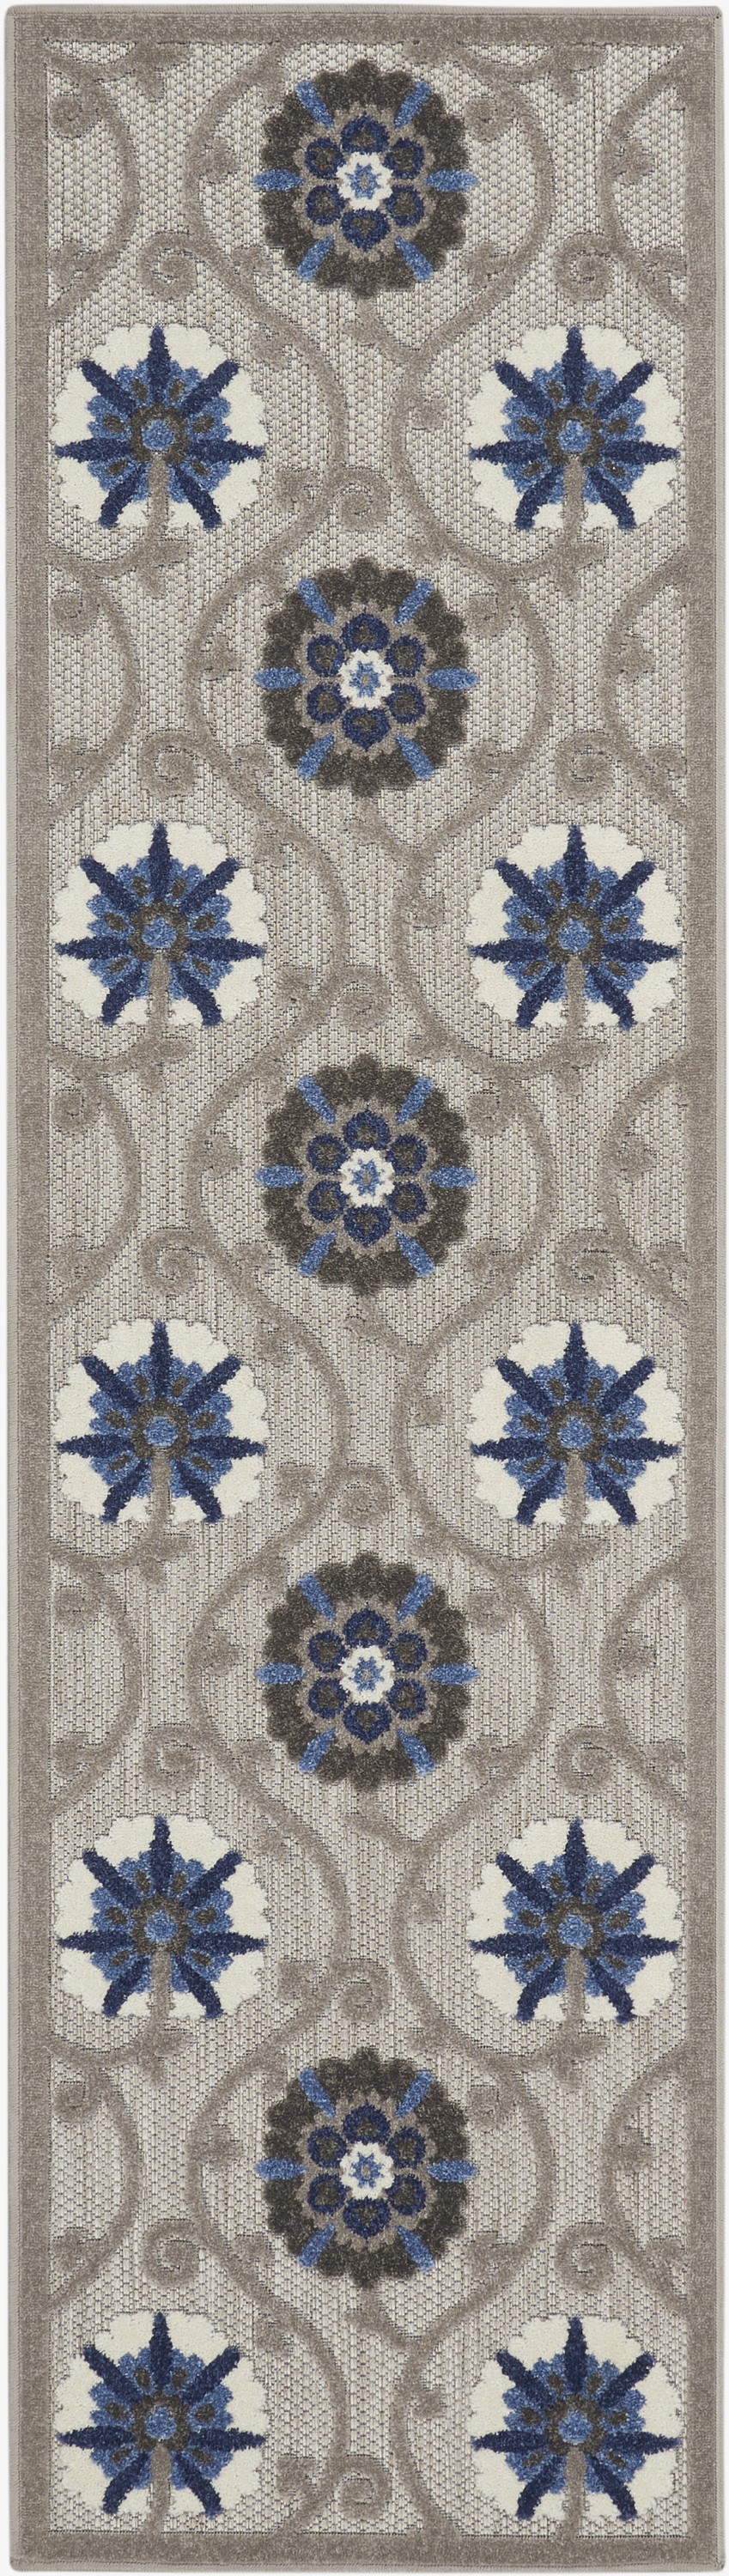 2' X 8' Blue And Gray Floral Indoor Outdoor Area Rug-384980-1